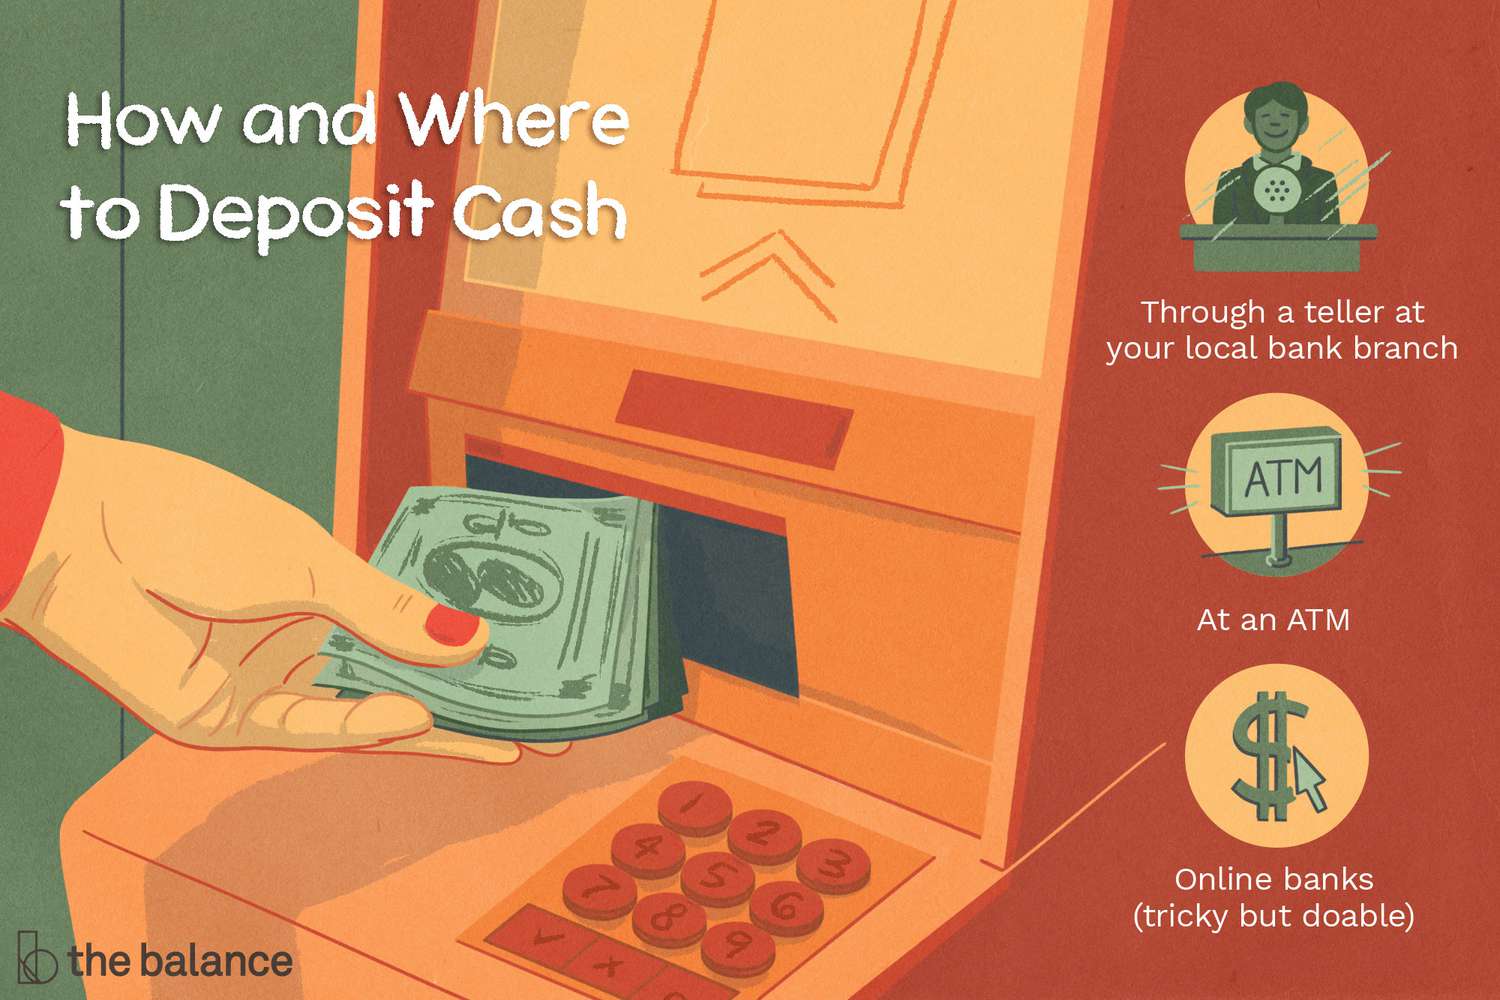 A hand inserting money into an ATM appears alongside icons of a bank teller, an ATM sign, and a dollar symbol, representing a headline that reads: How and Where to Deposit Cash.